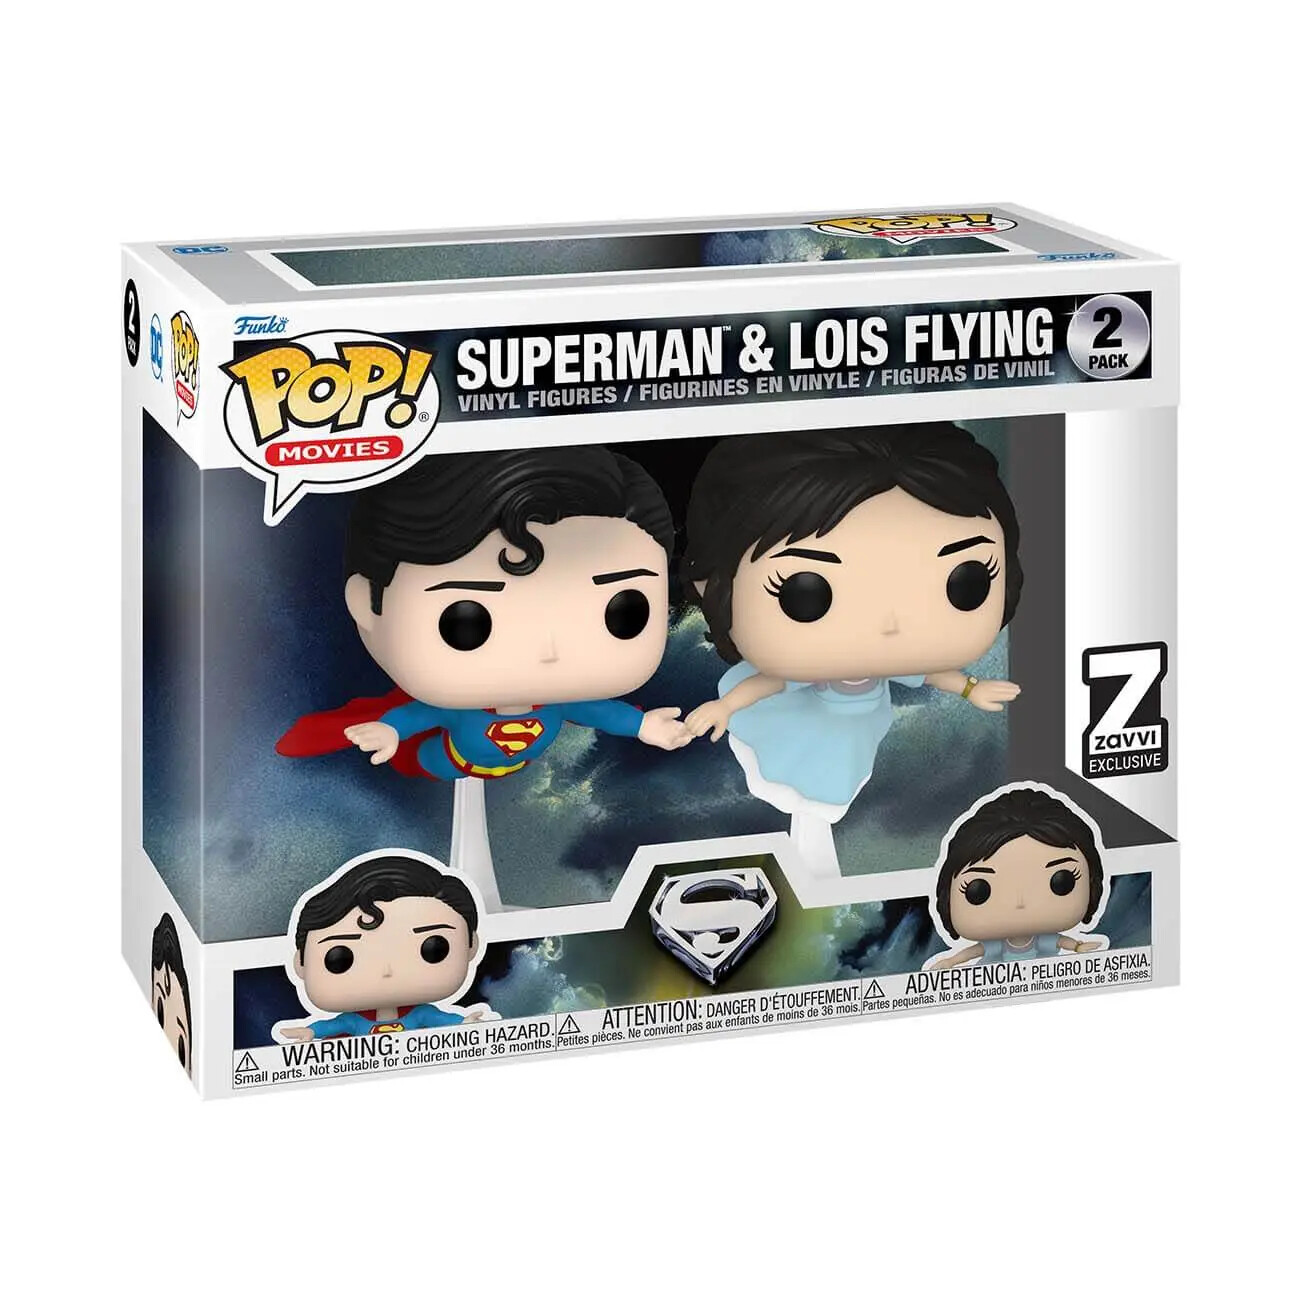 Funko Superman The Movie - Superman and Lois Flying Zavvi Exclusive 2 Pack Pop! Vinyl Figure